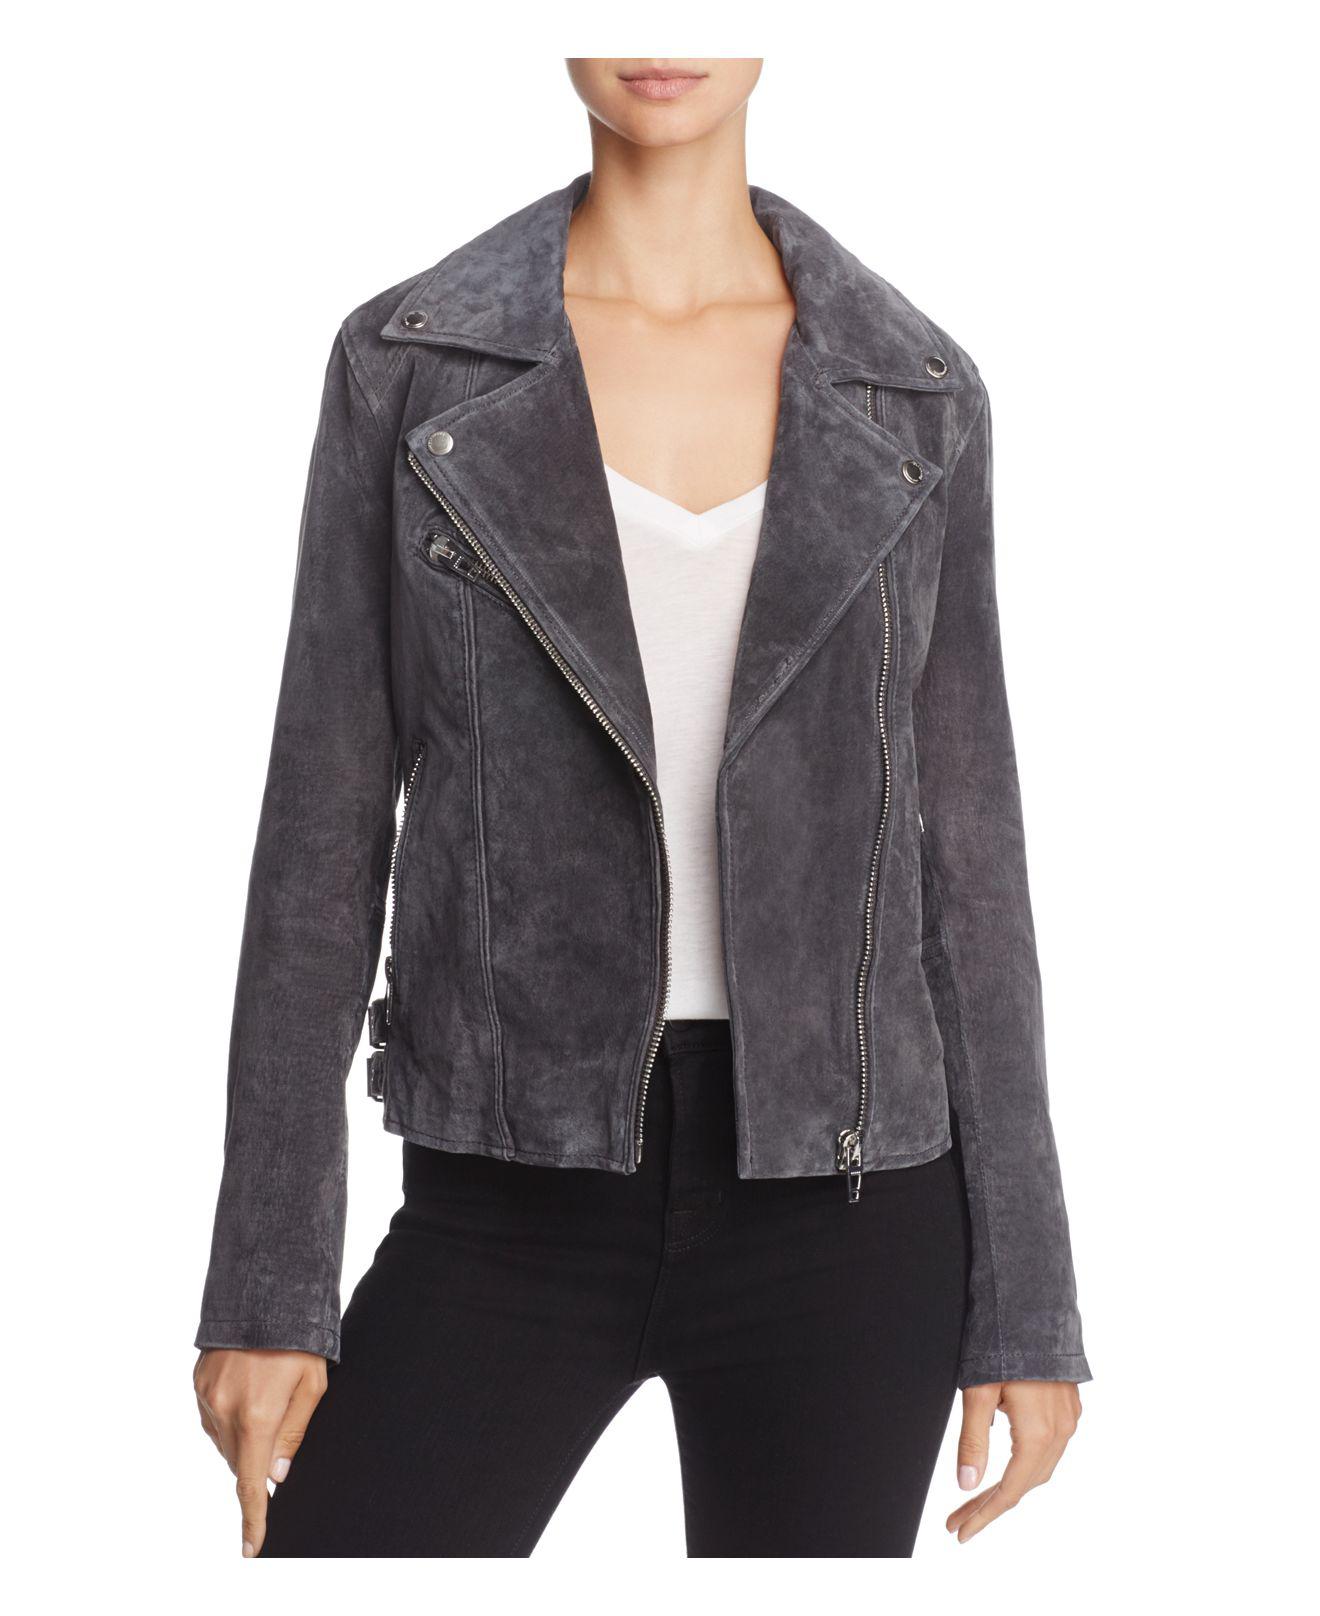 Lyst - Blank Nyc Suede Moto Jacket in Gray